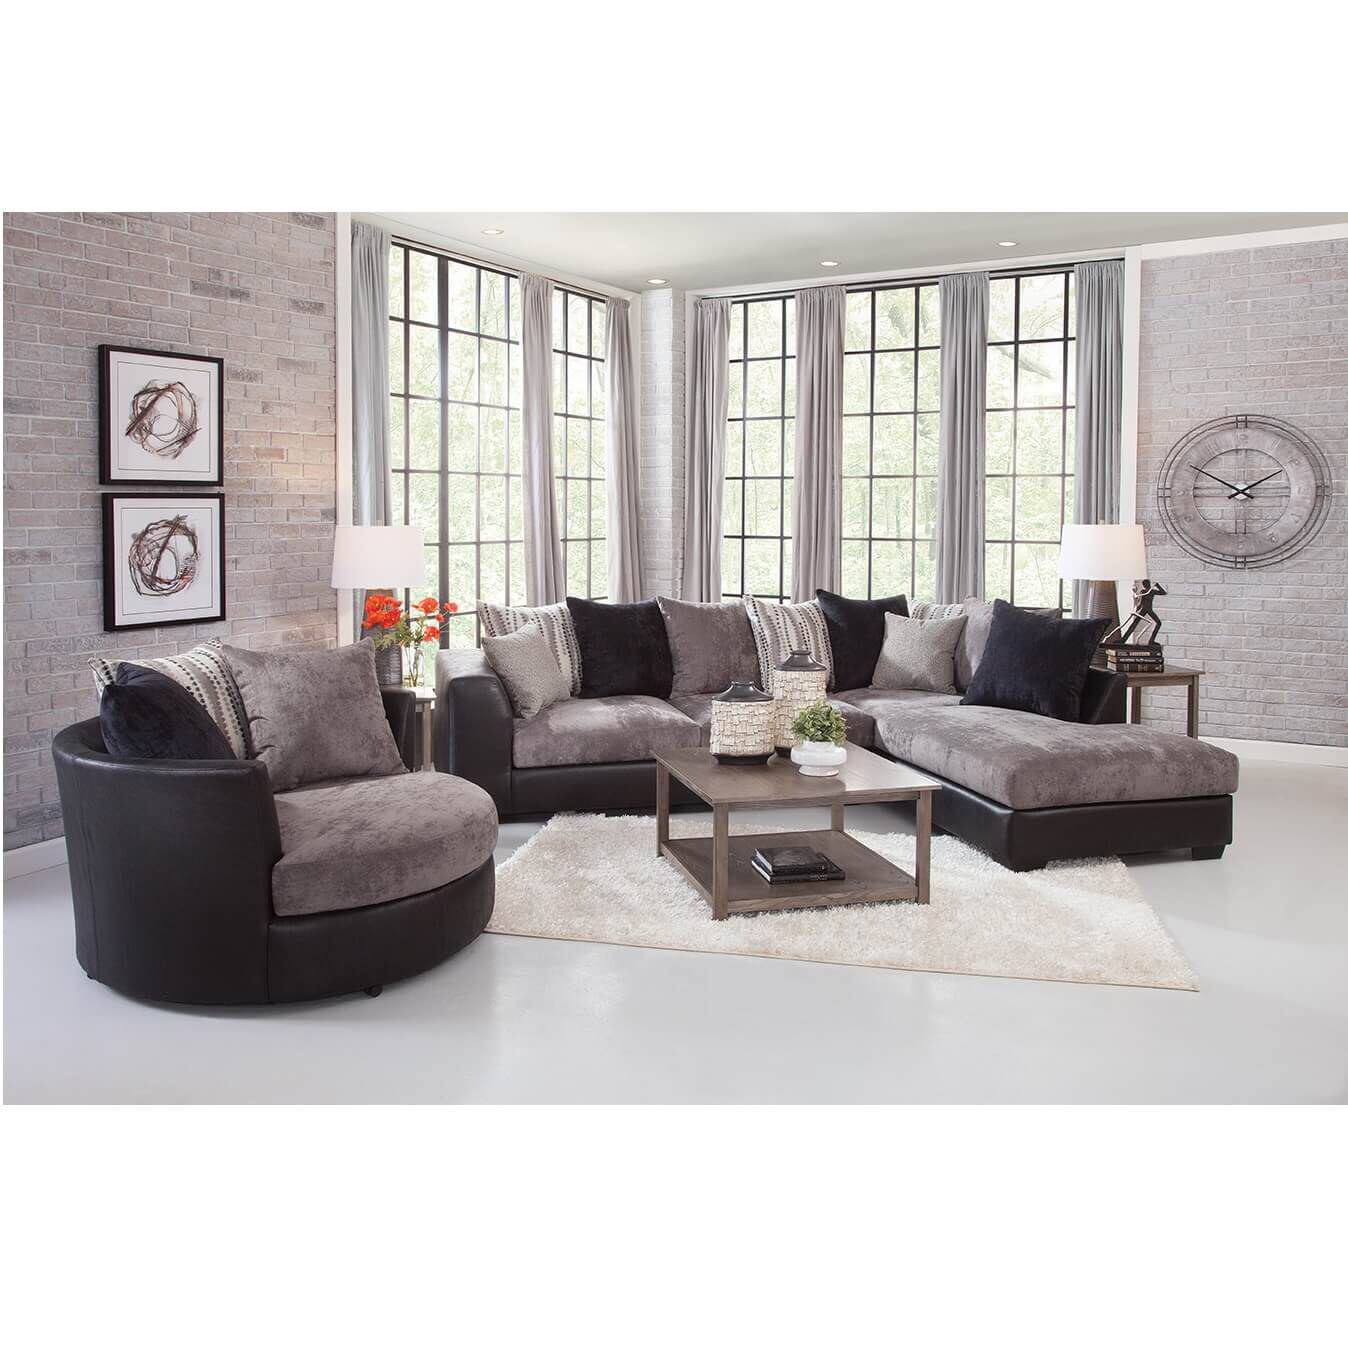 living room furniture chairs for sale